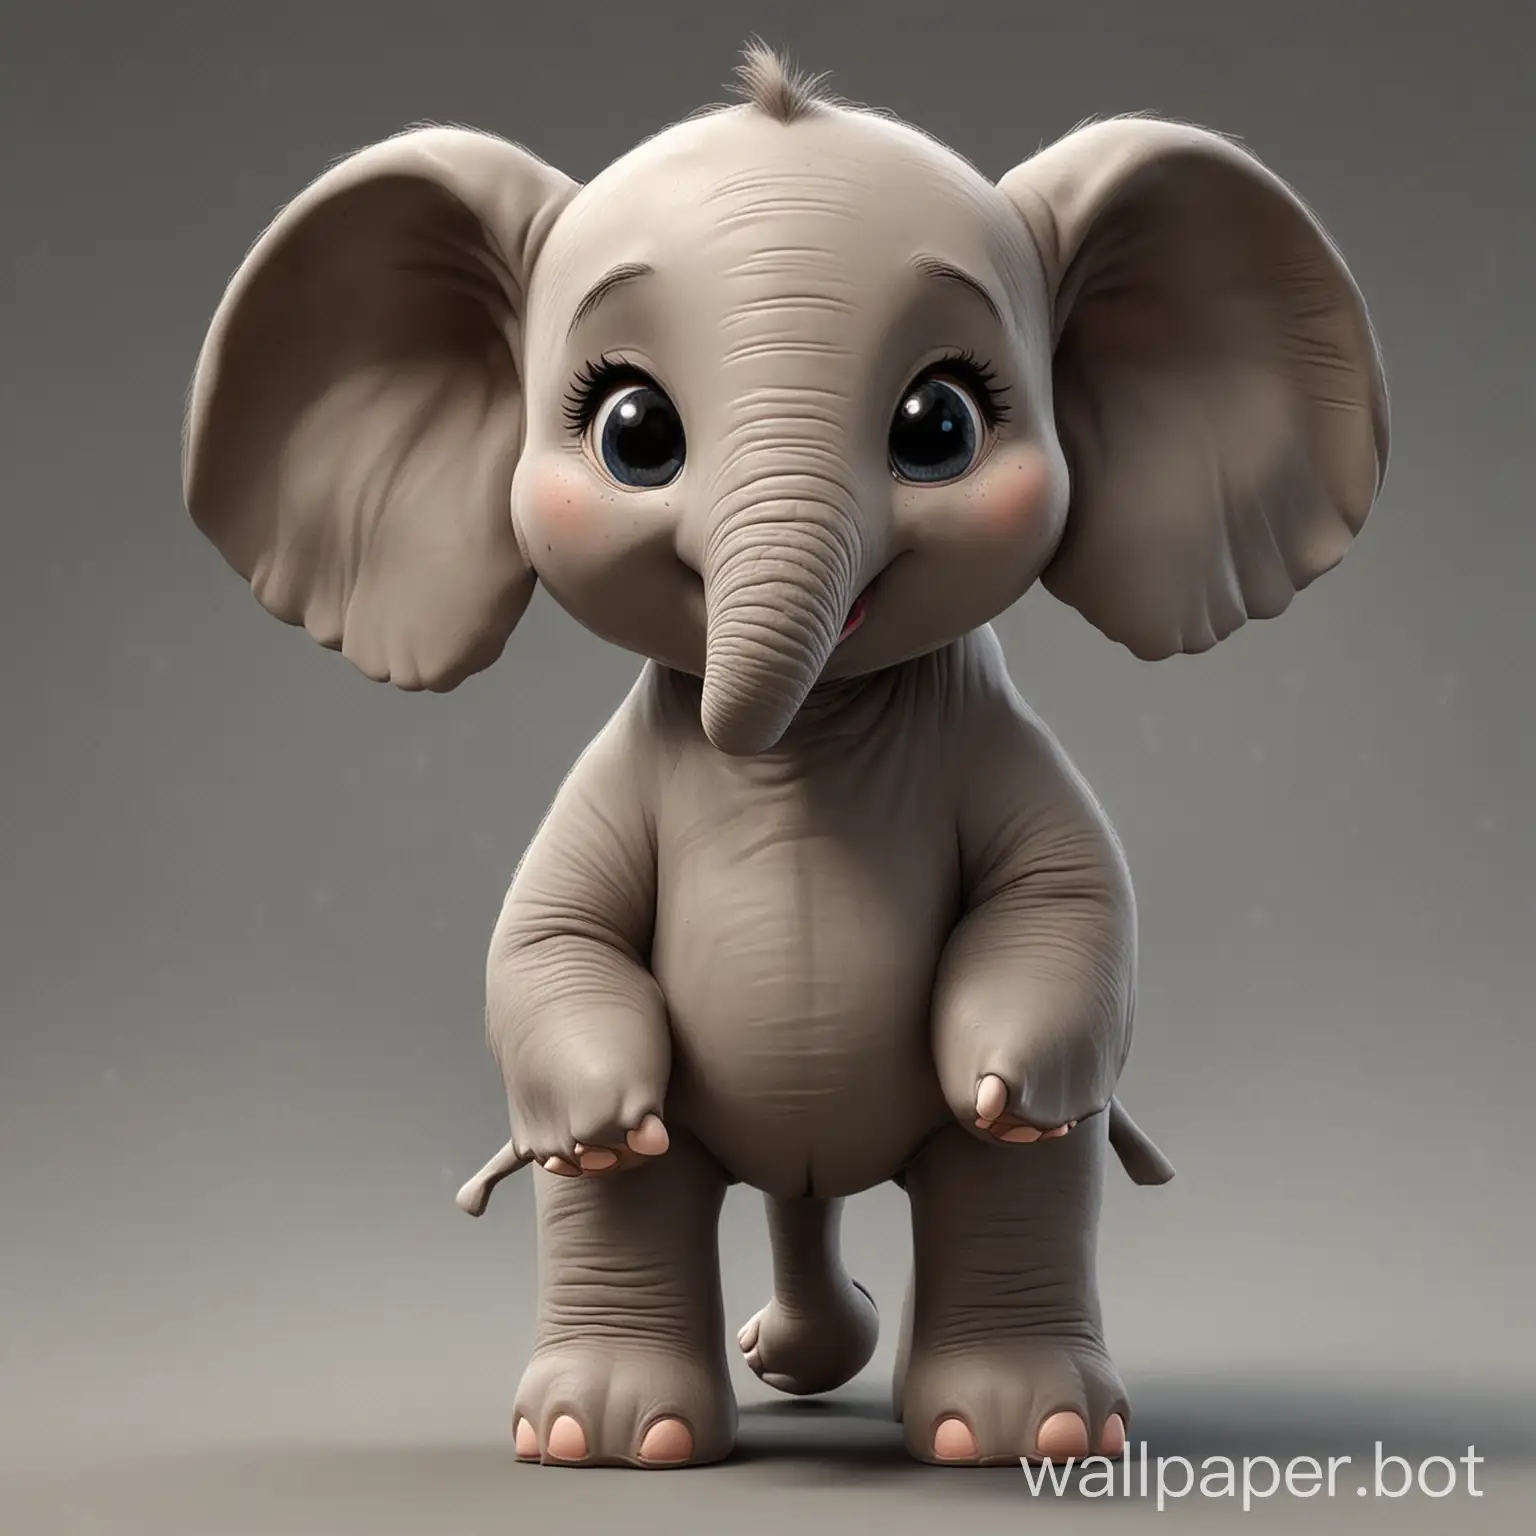 i am a 3d artist i want to sculpt a cute baby elephant, cartoon type, give me a reference for that with a front, side and back view